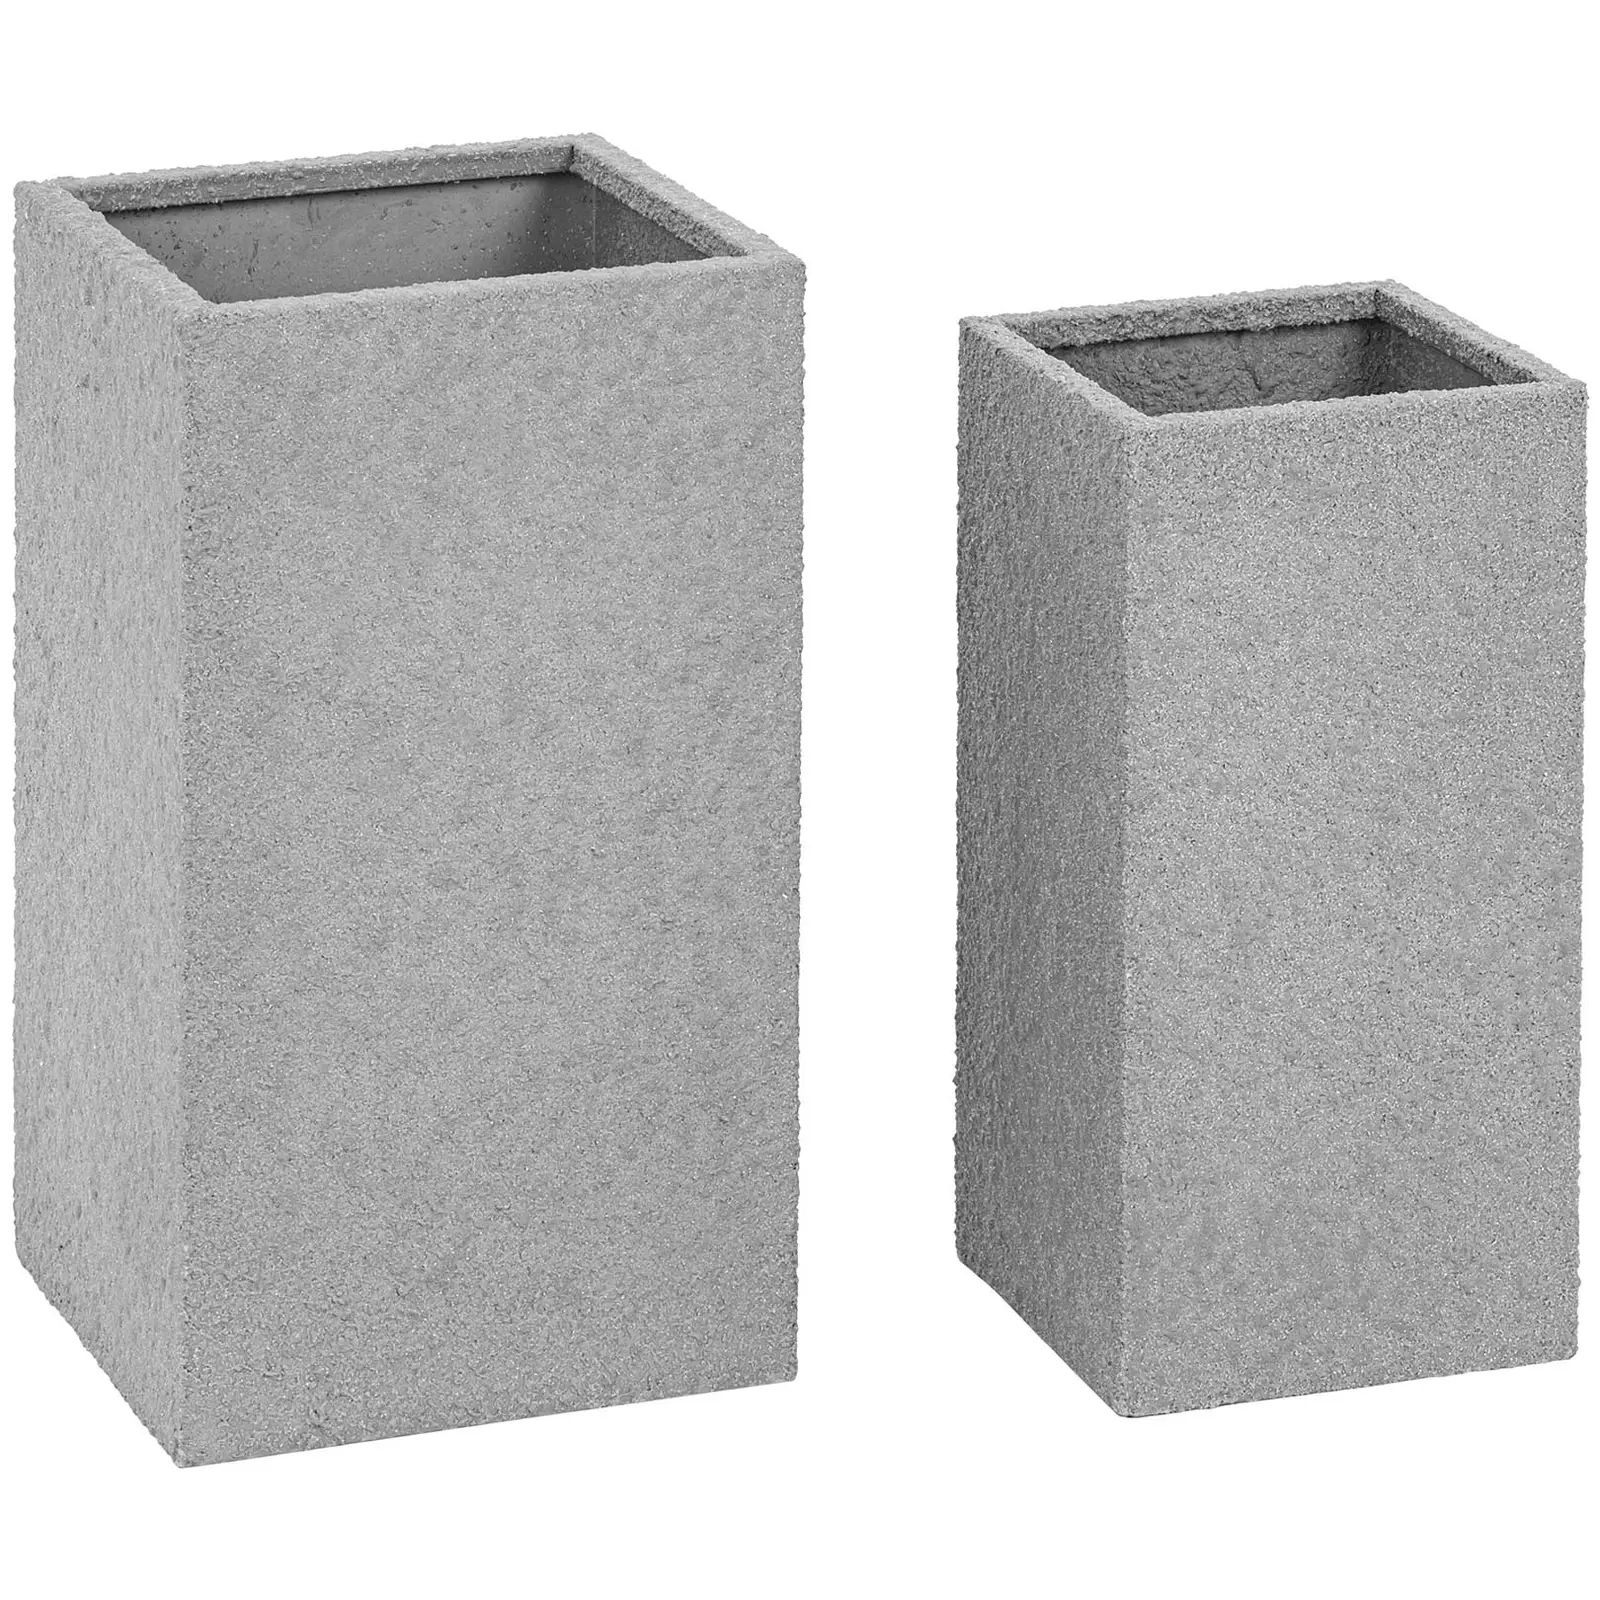 Planter Pot - set of 2 - Stainless steel - sandstone look - Royal Catering